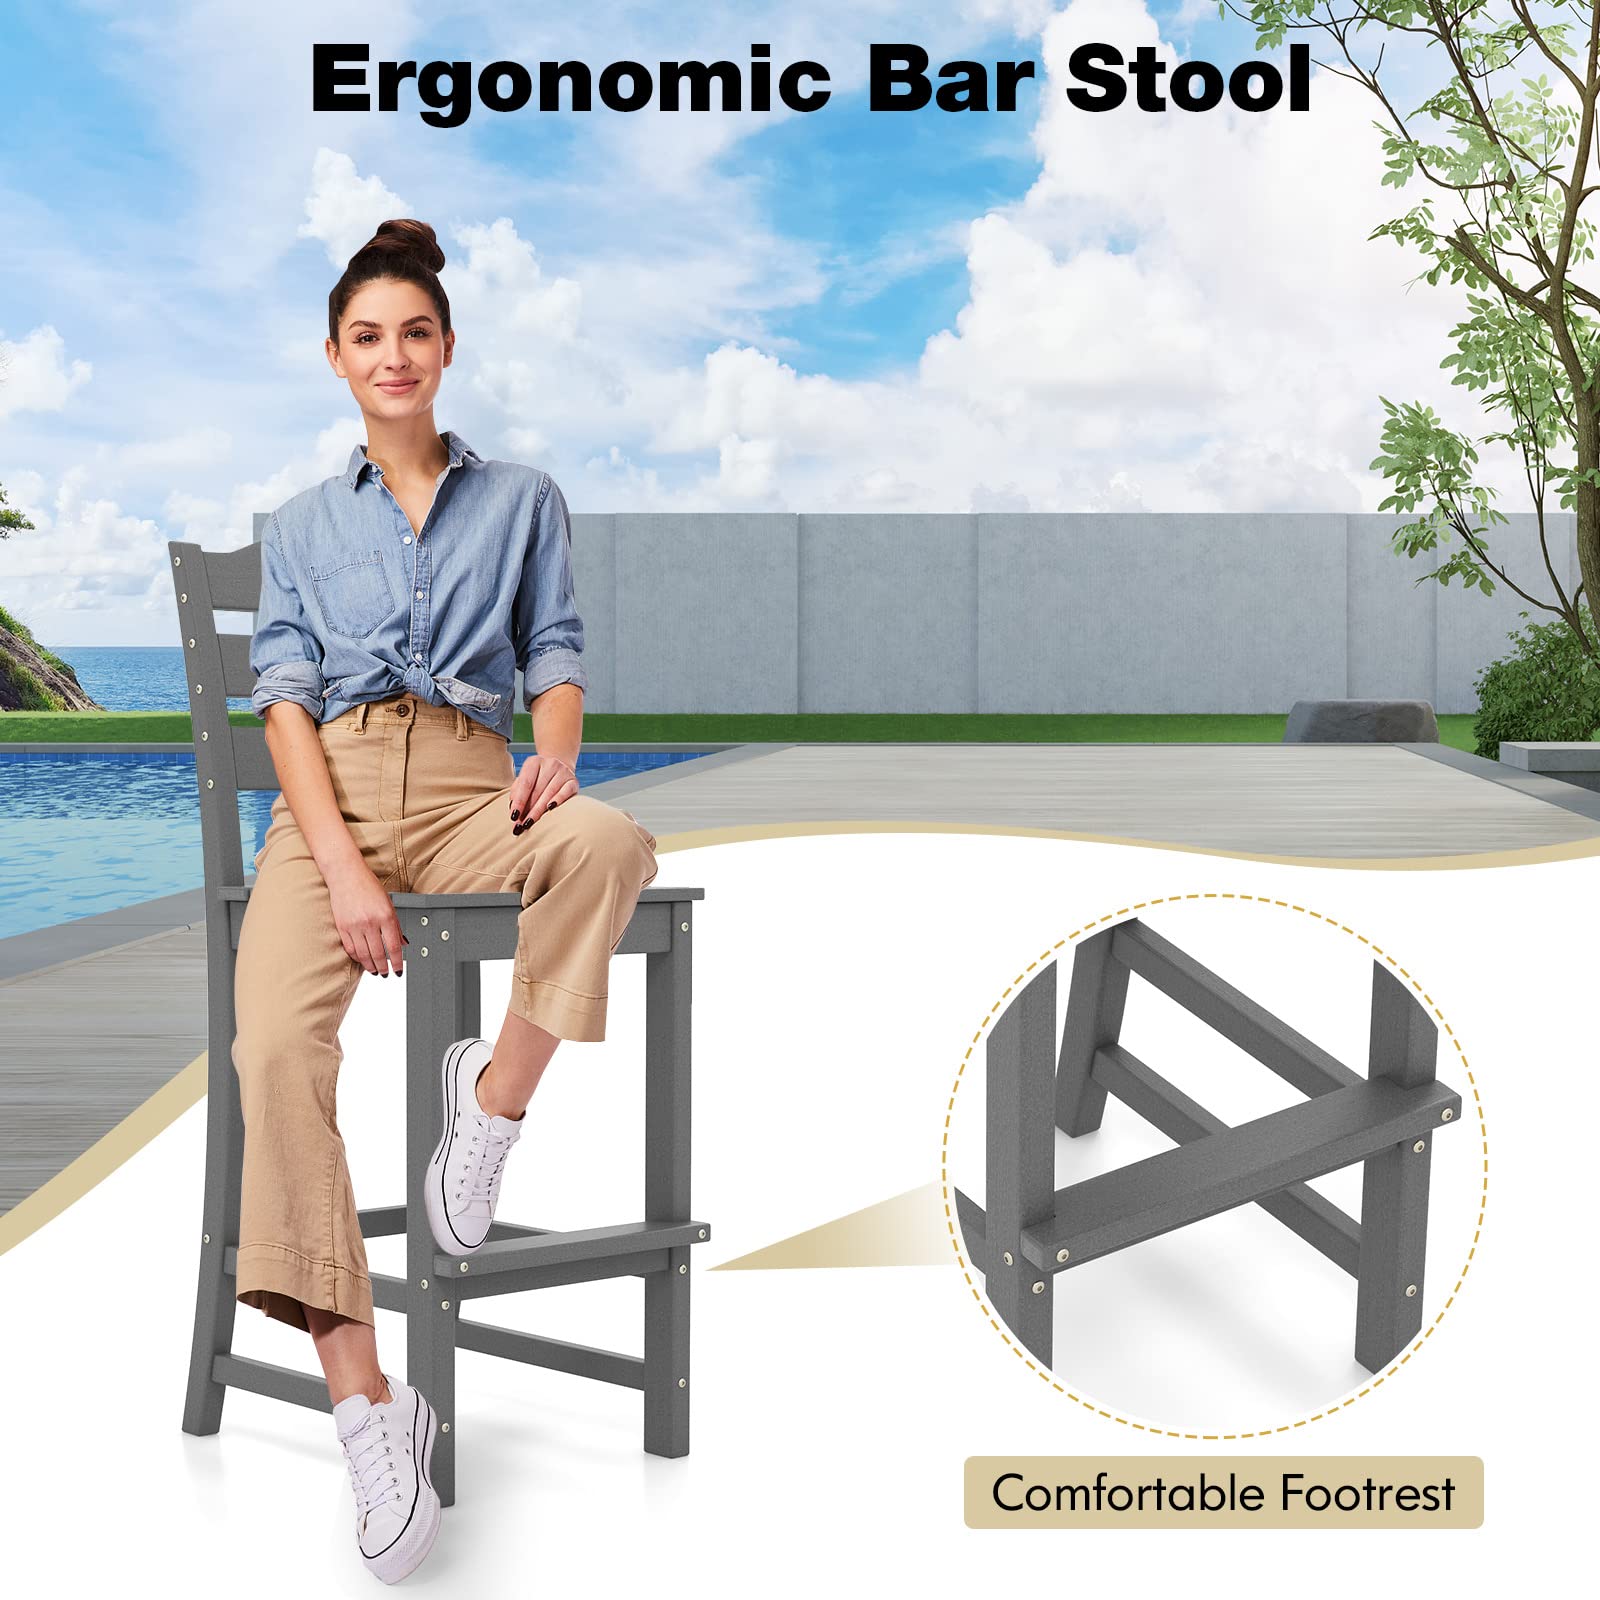 Giantex Outdoor HDPE Bar Stool, Patio Tall Bar Chair with Backrest and Footrest, 30 Inches Counter Height Barstools